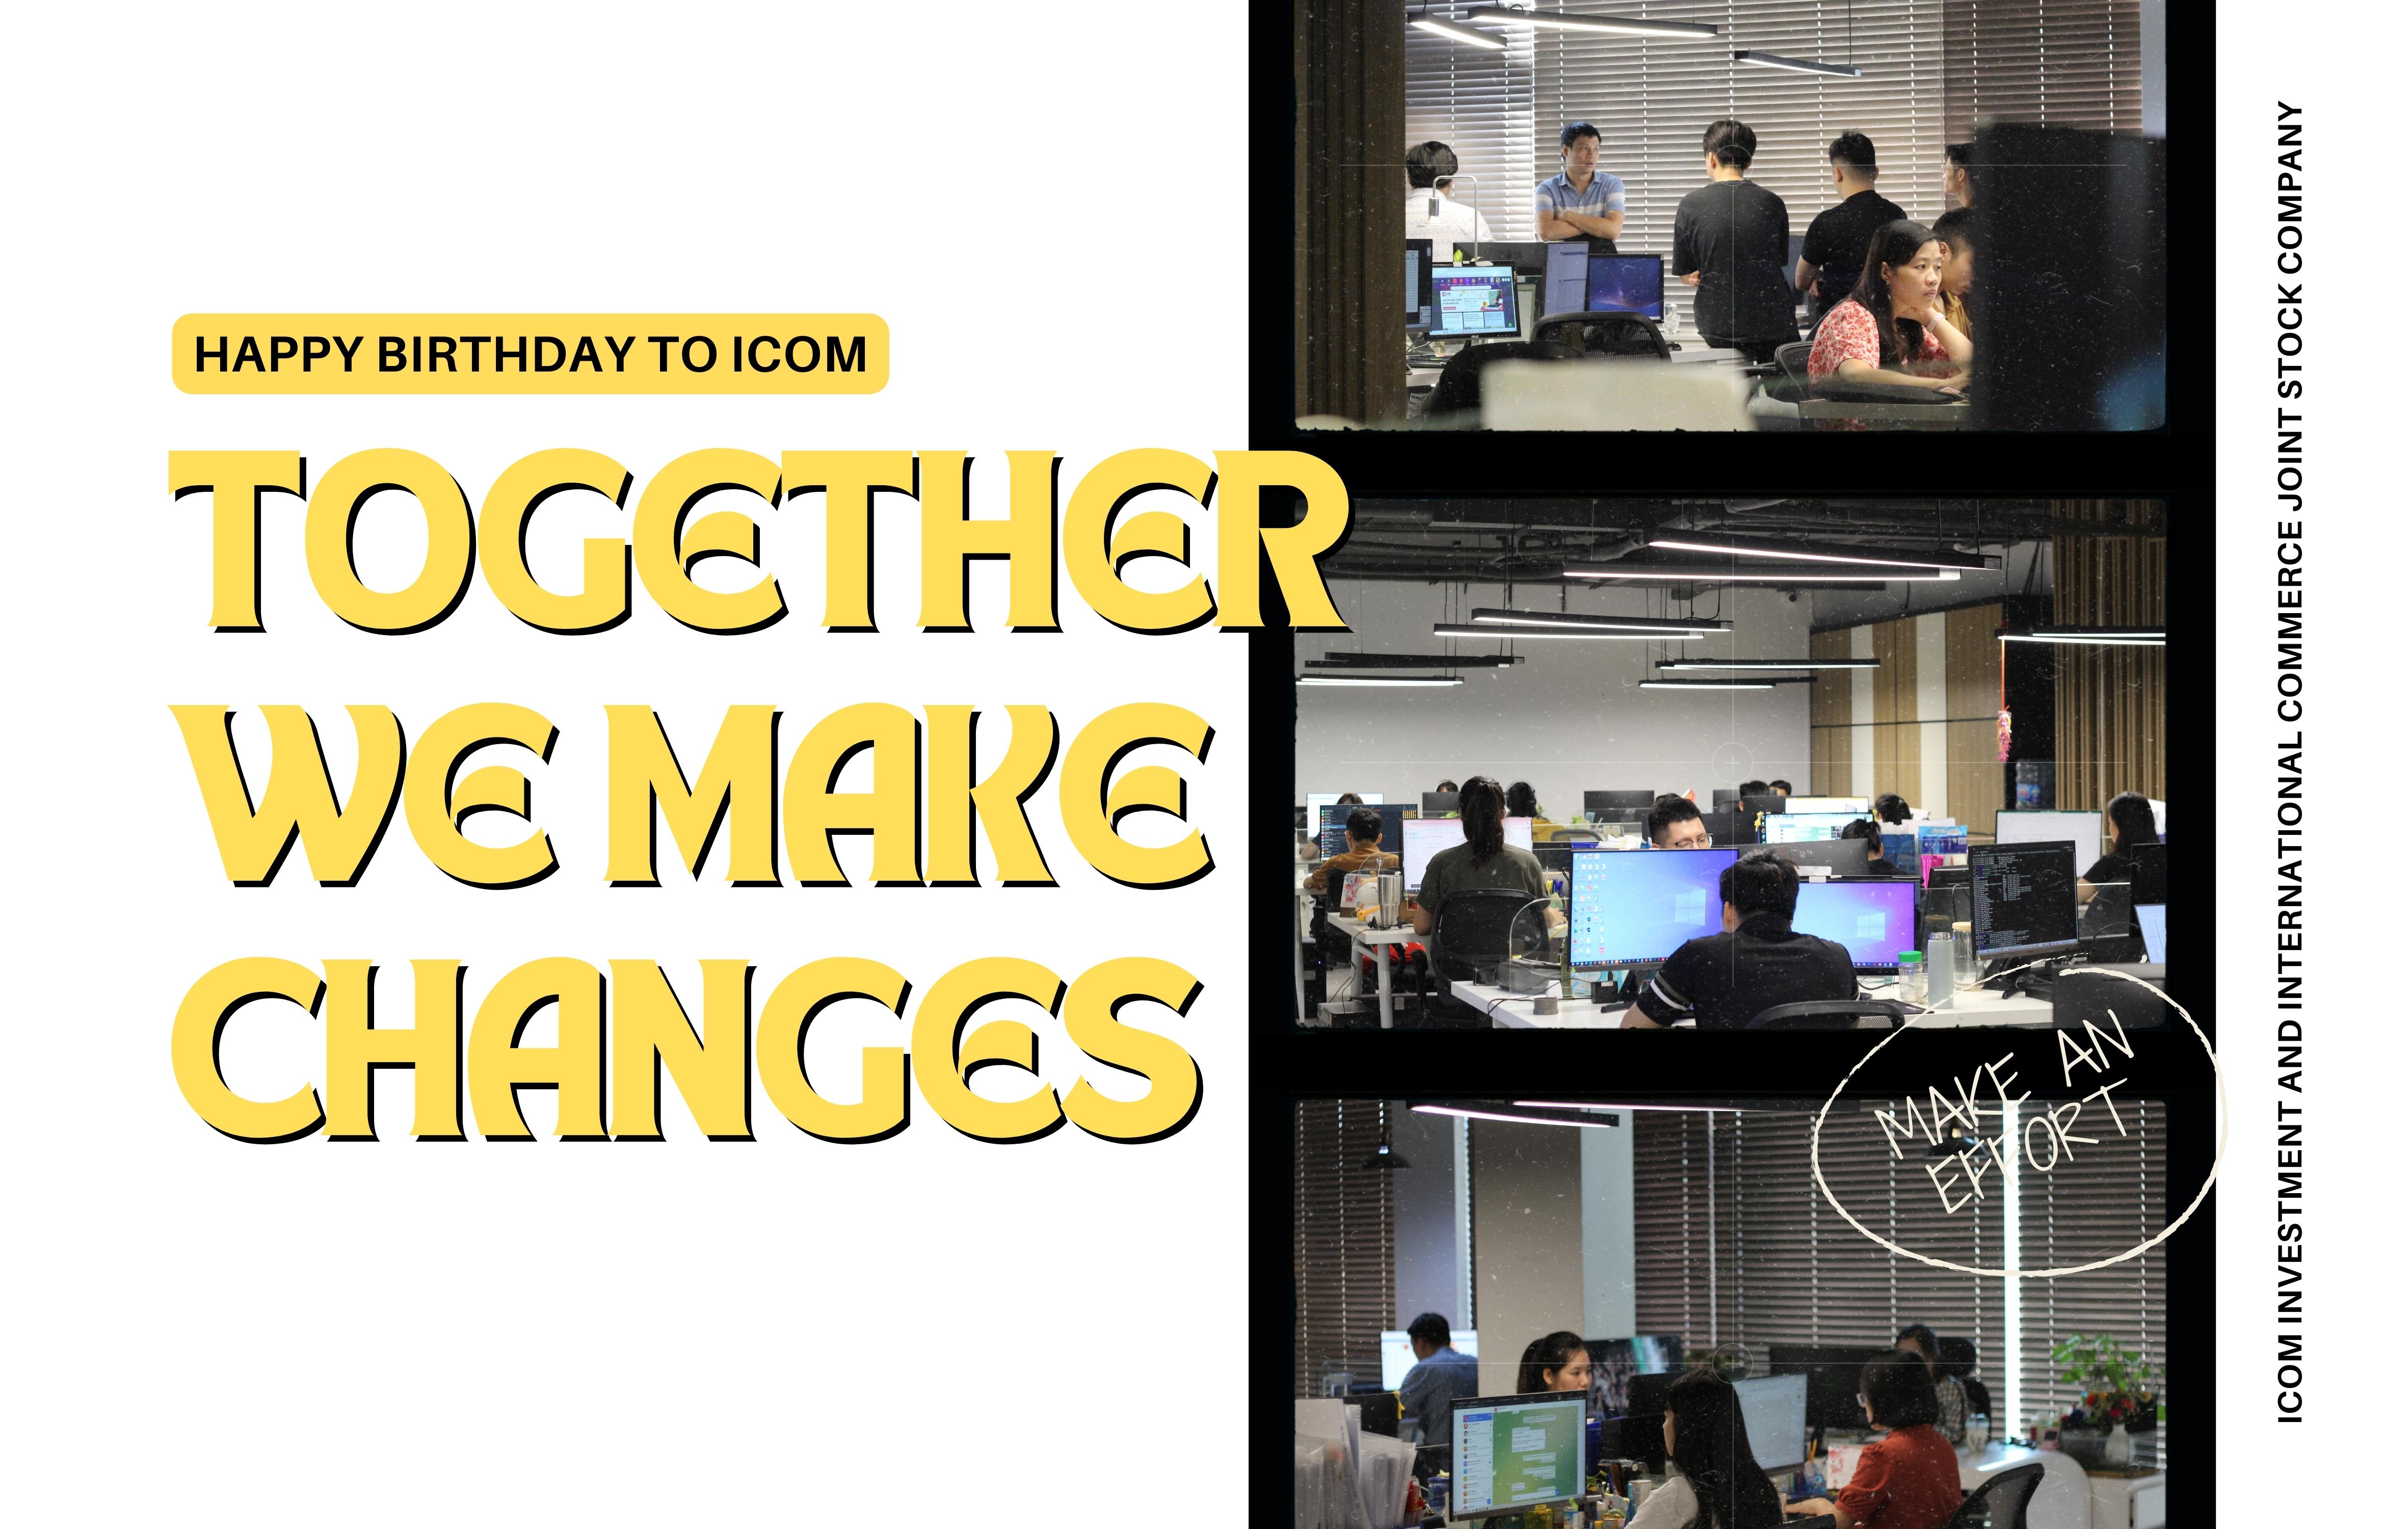 Teambuilding celebrates the 15th anniversary of the founding of ICOM company.